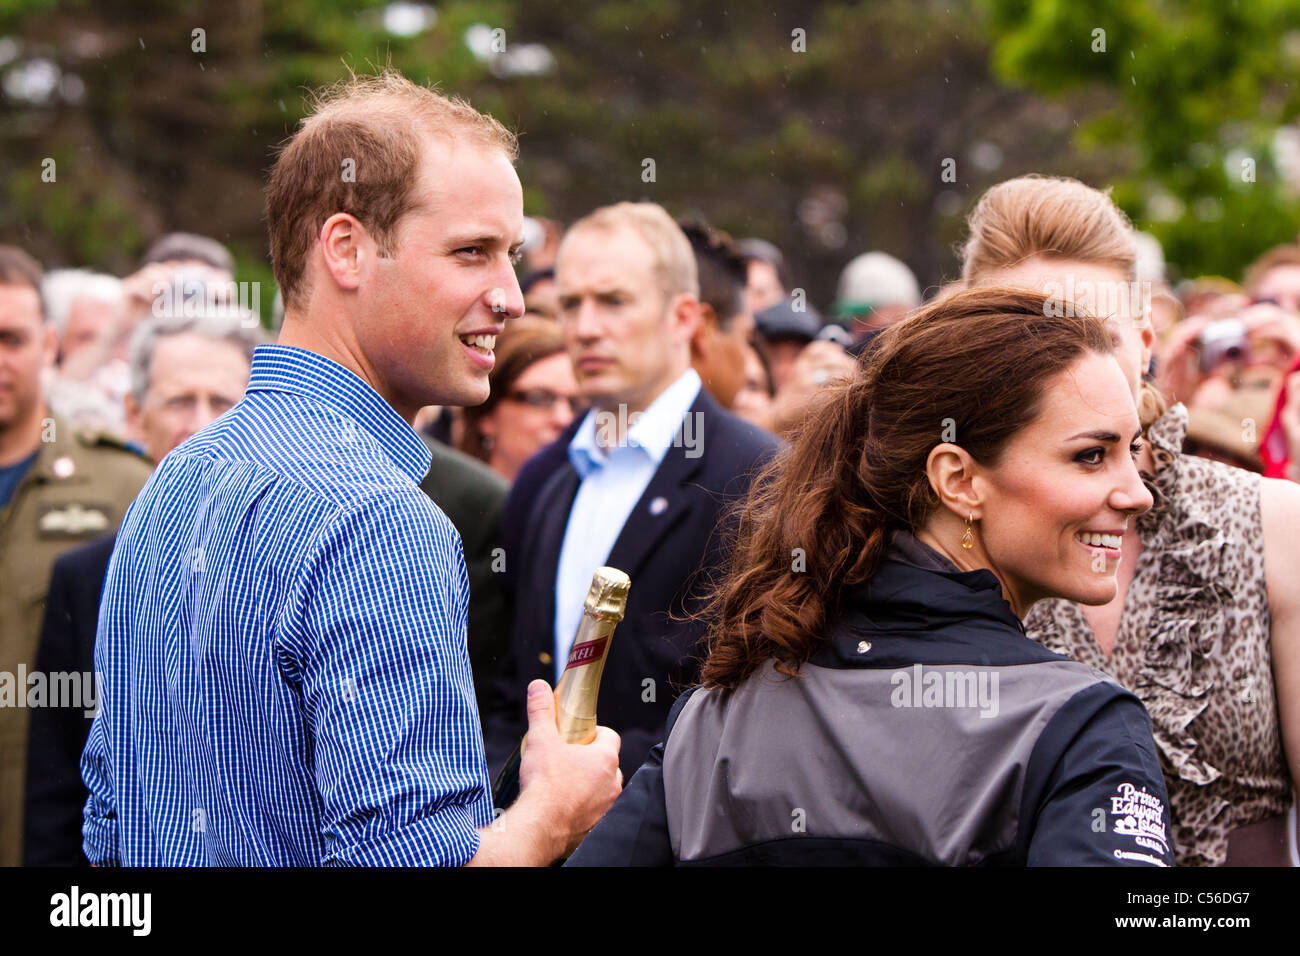 Prince William, Duke of Cambridge and Catherine, Duchess of Cambridge enjoy champaign after a dragon boat race in PEI, Canada Stock Photo